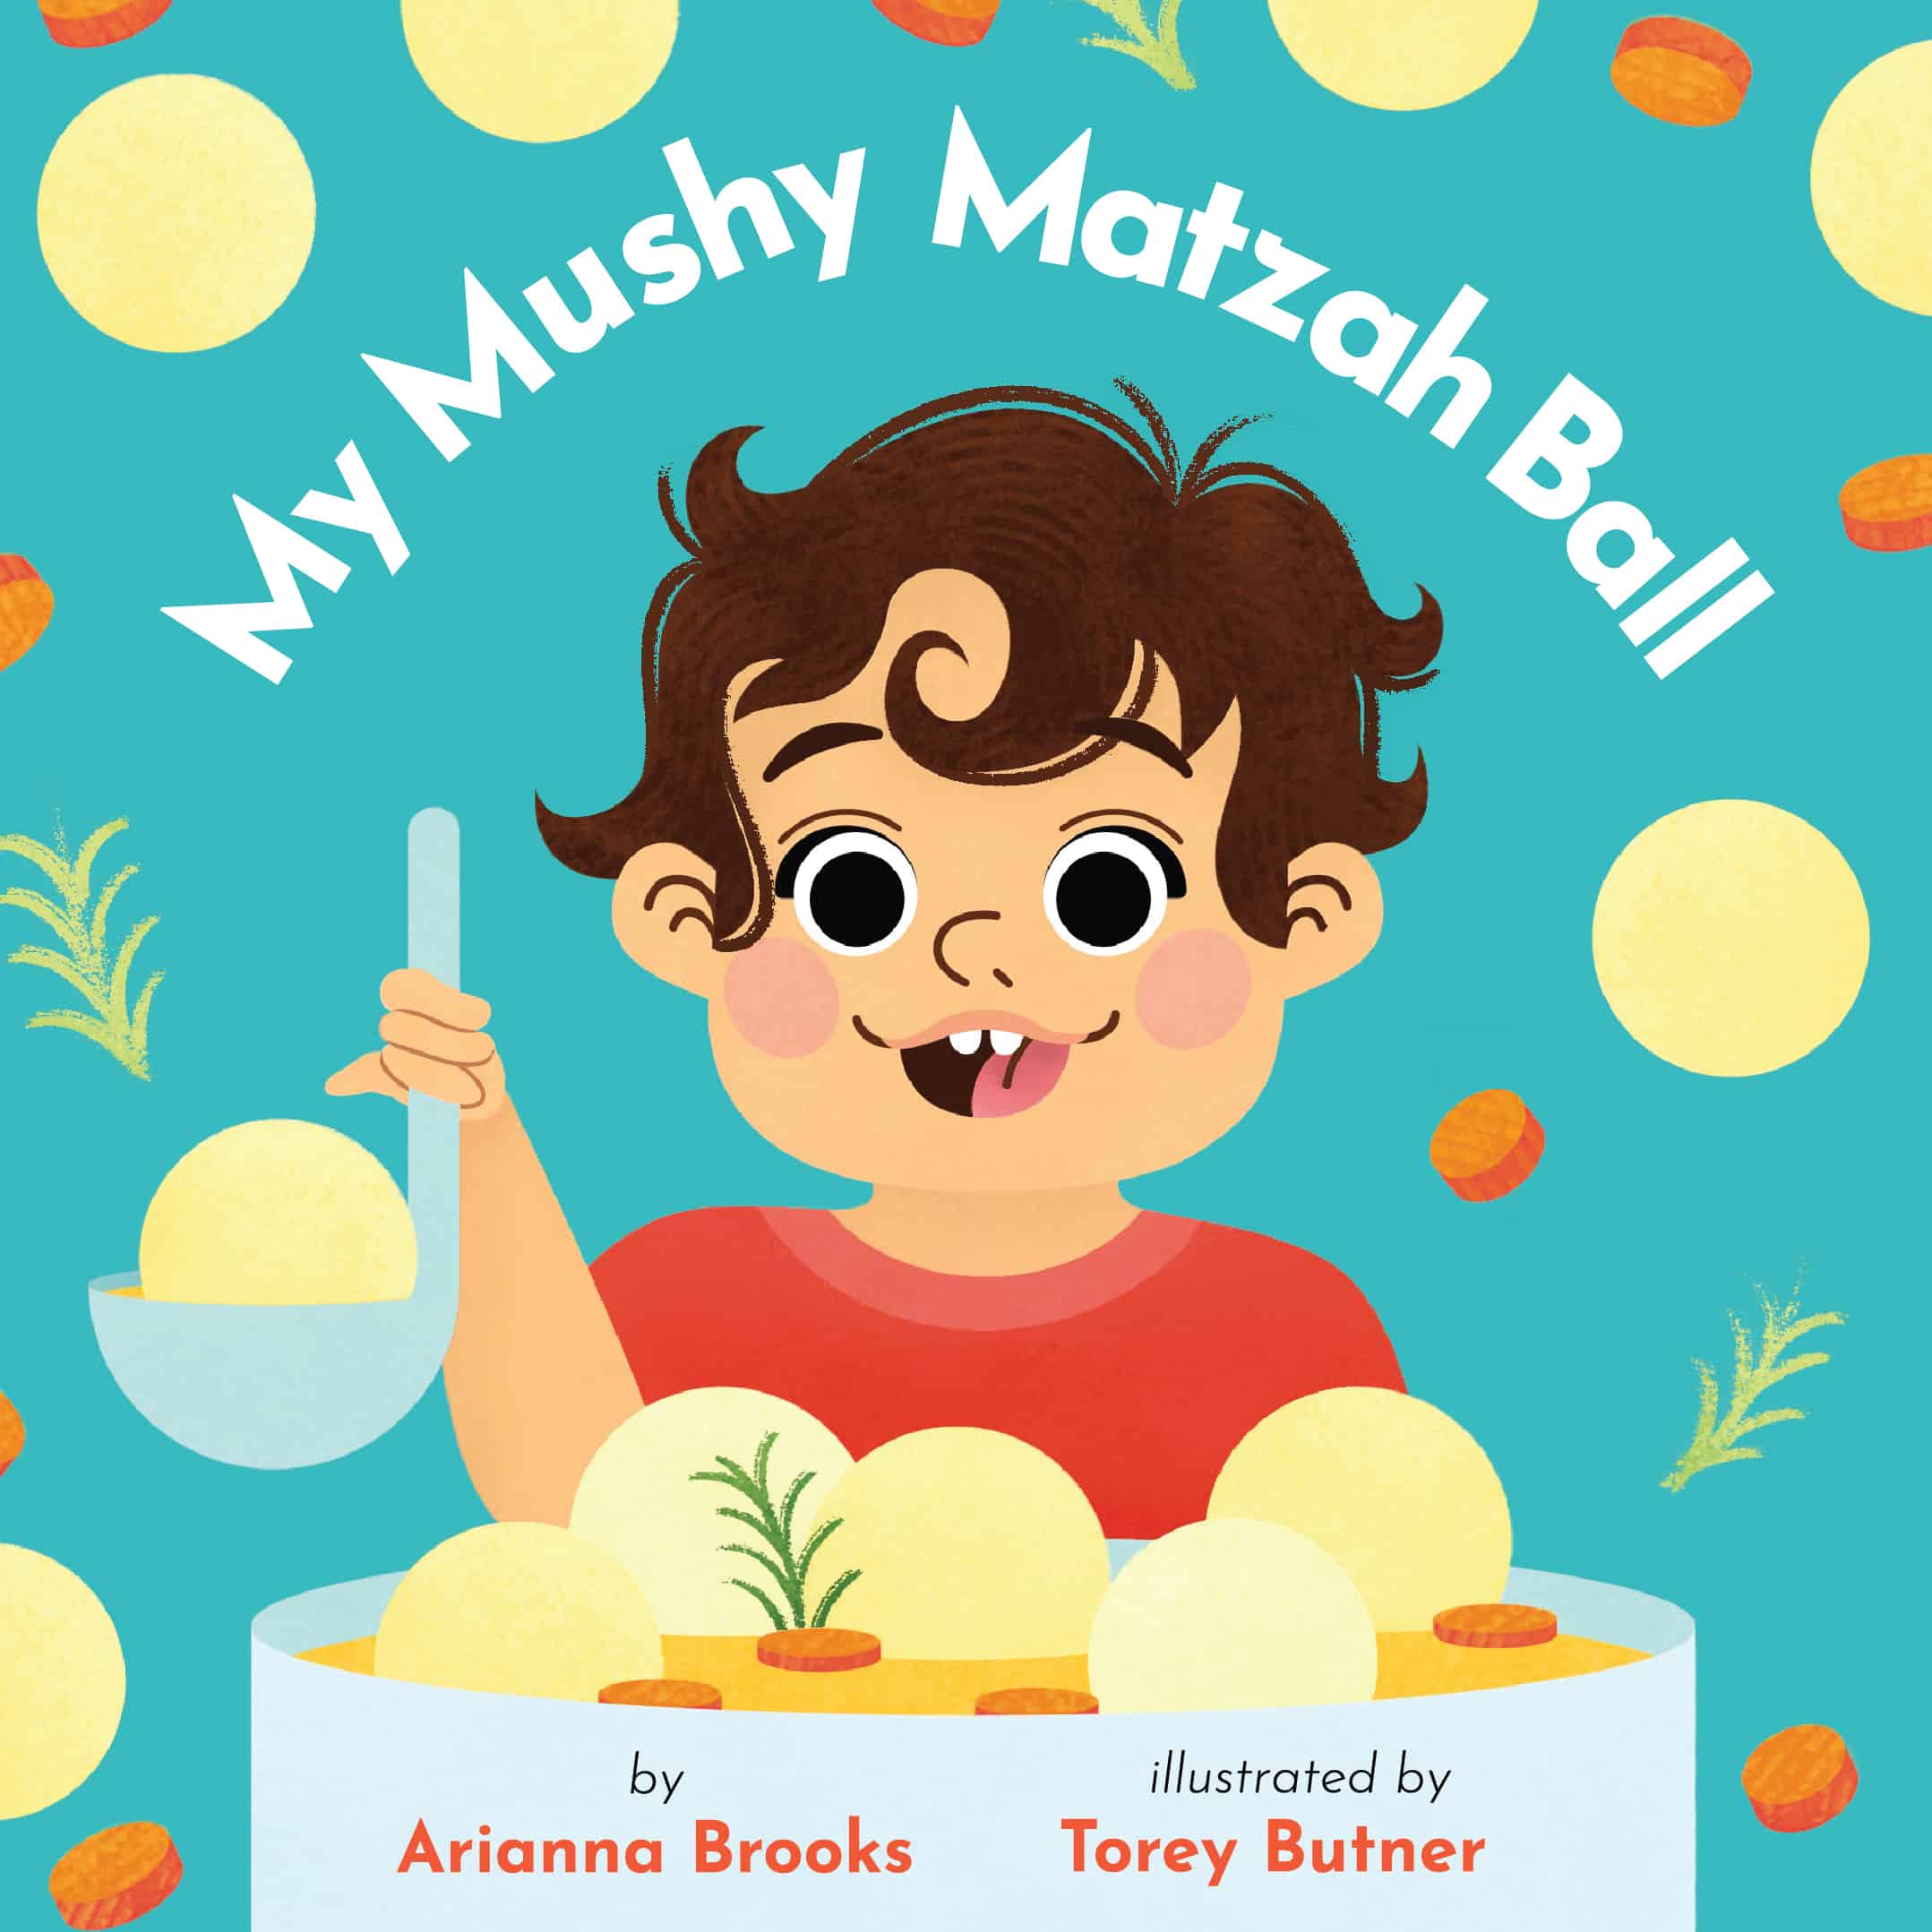 My Mushy Matzah Ball - Jewish Baby Board Book for toddlers and kids, ages 0-3